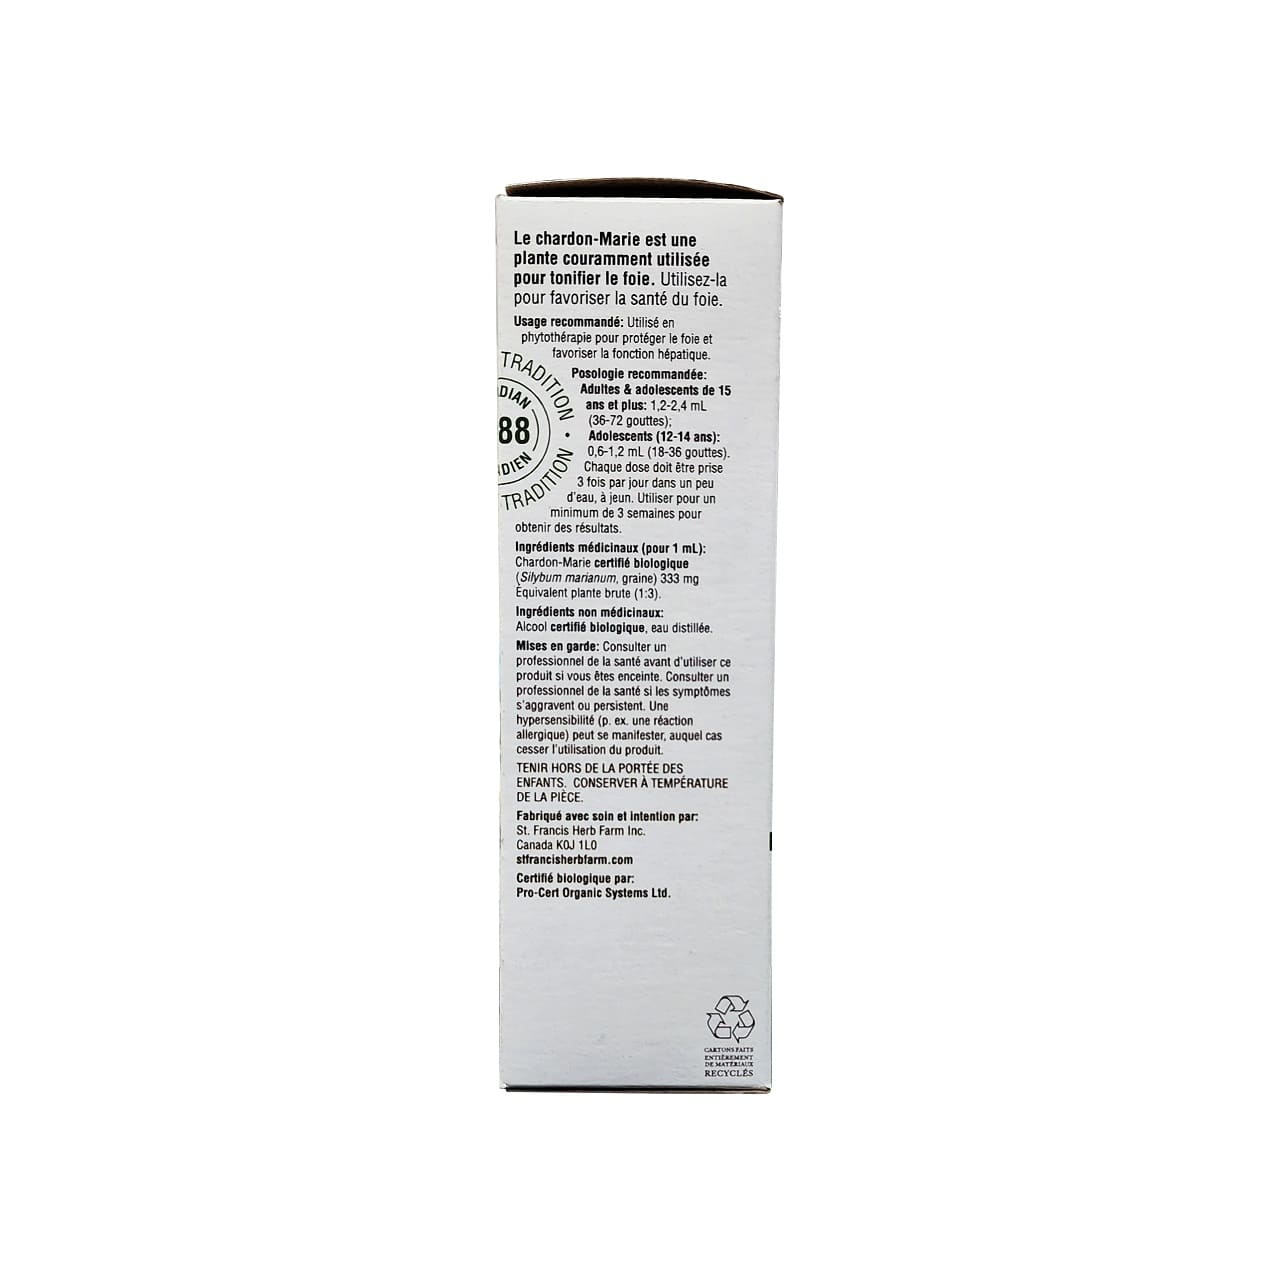 Description, uses, doses, ingredients, warnings for St. Francis Milk Thistle Tincture (100 mL) in French